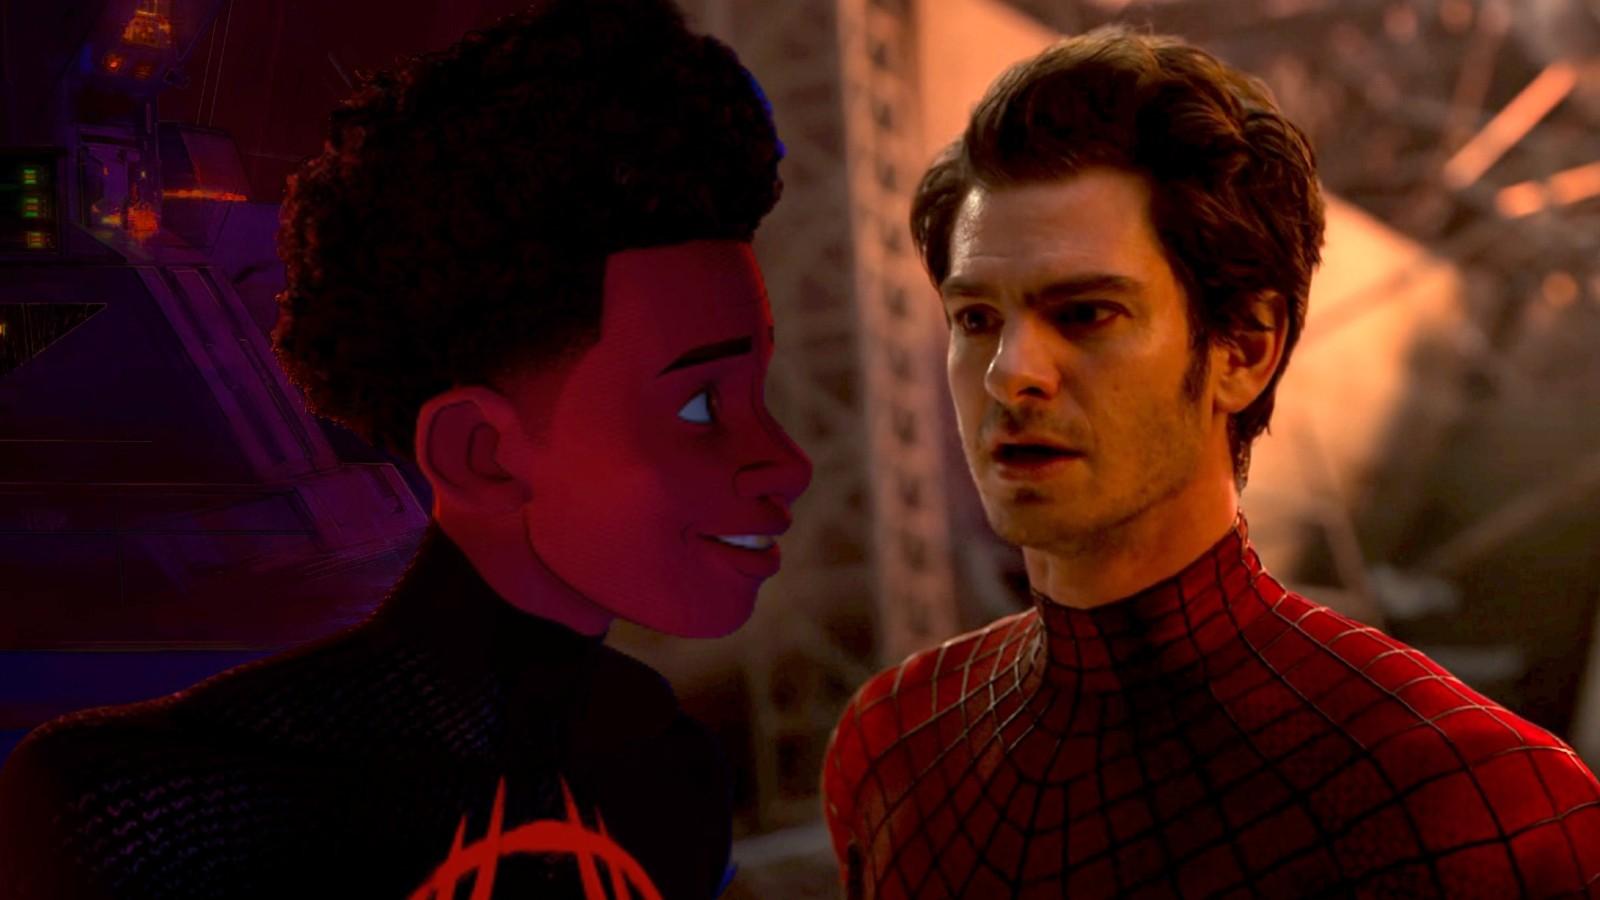 Miles Morales in Spider-Man: Across the Spider-Verse and Andrew Garfield in live-action in Spider-Man: No Way Home